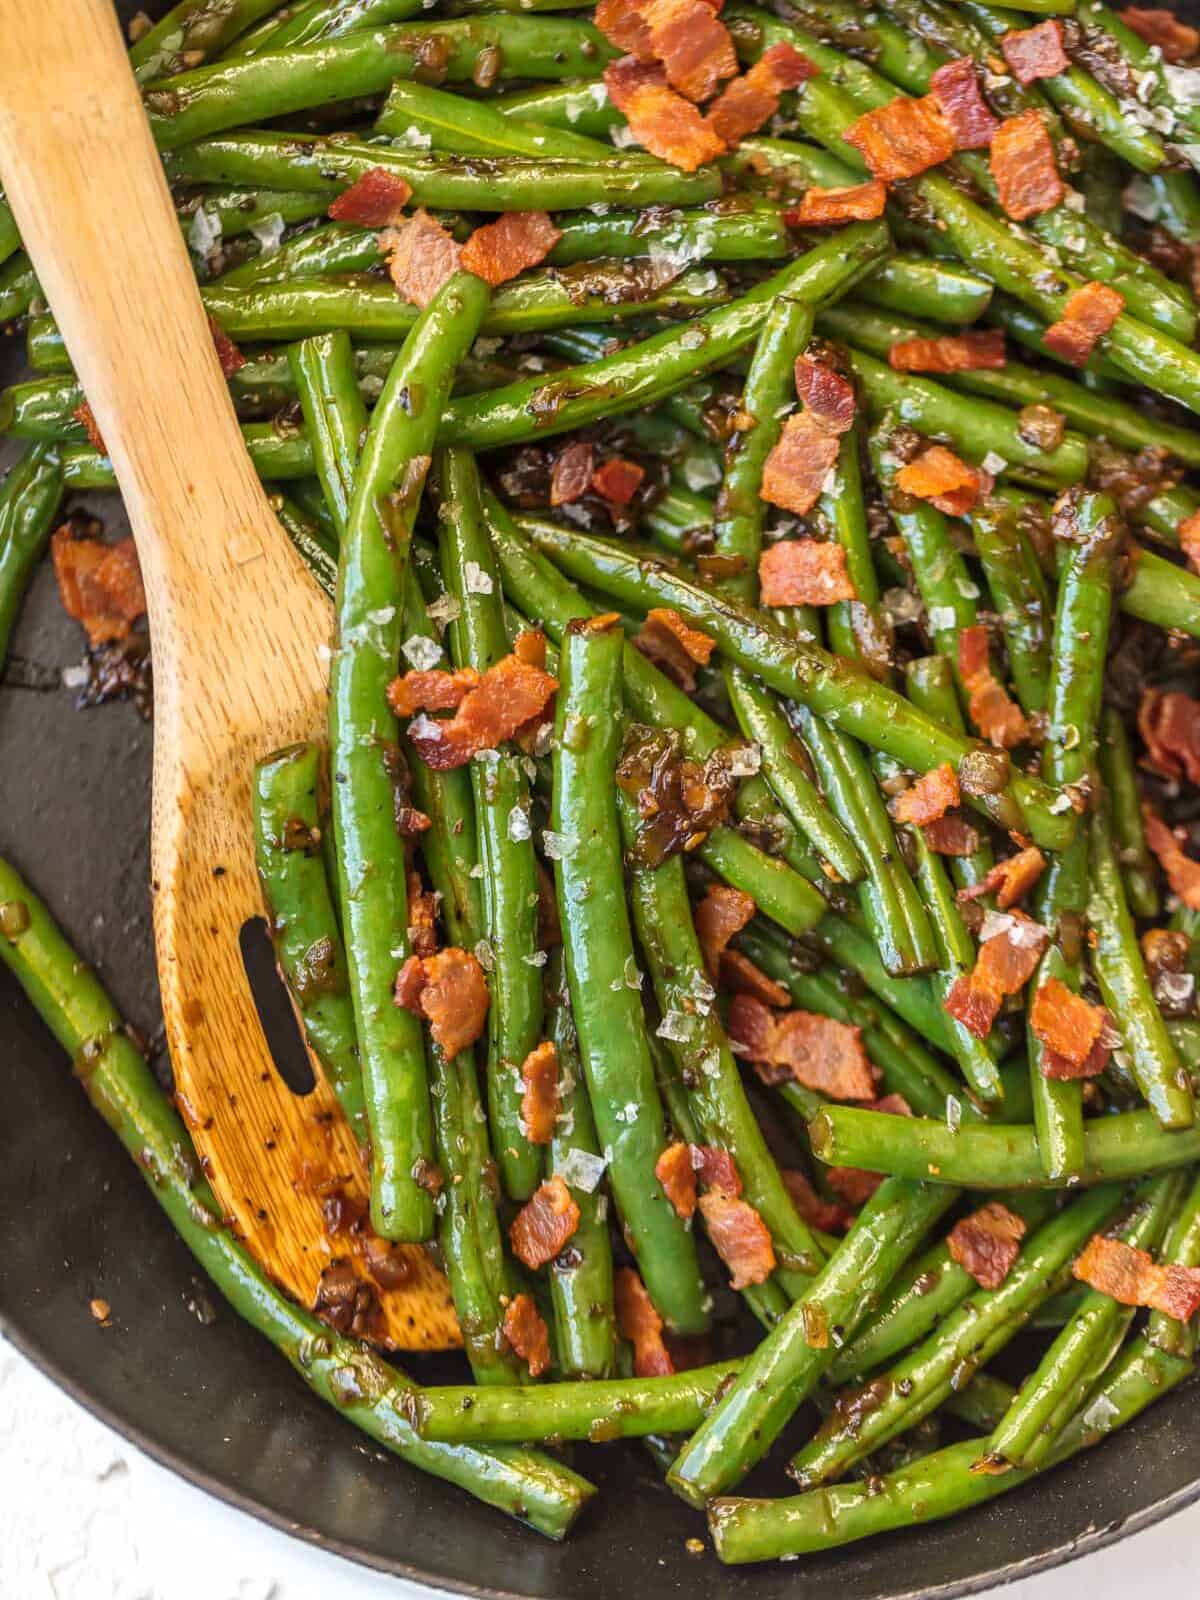 Holiday Side Dish: Green Beans with Brown Butter Topping